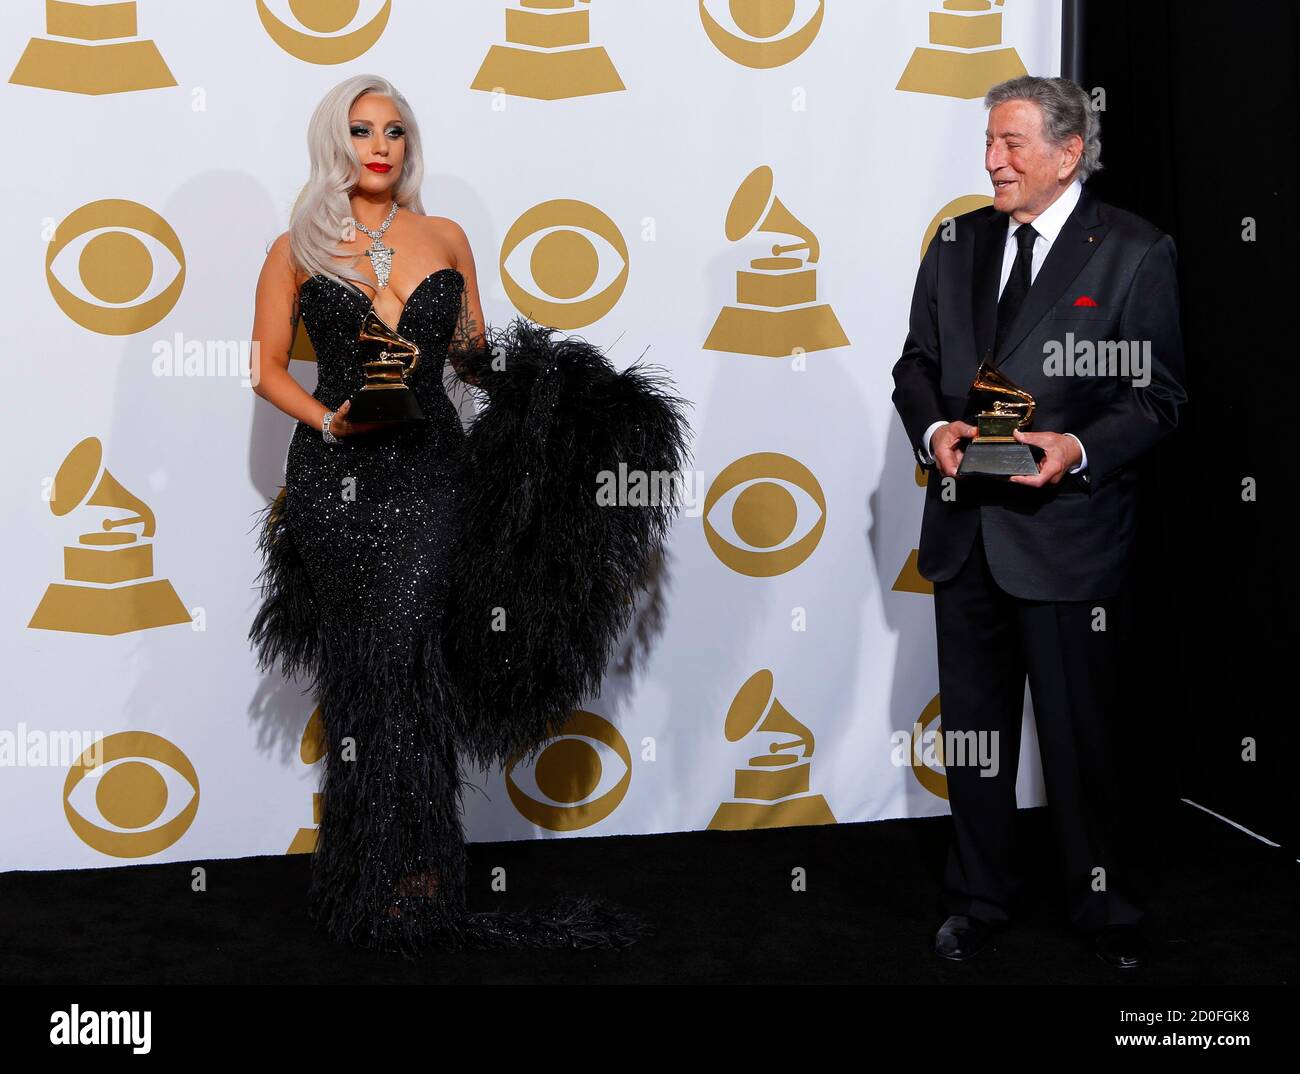 Lady Gaga and Tony Bennett pose in the press room with the awards they won  for Best Traditional Pop Vocal Album for "Cheek To Cheek" during the 57th  annual Grammy Awards in